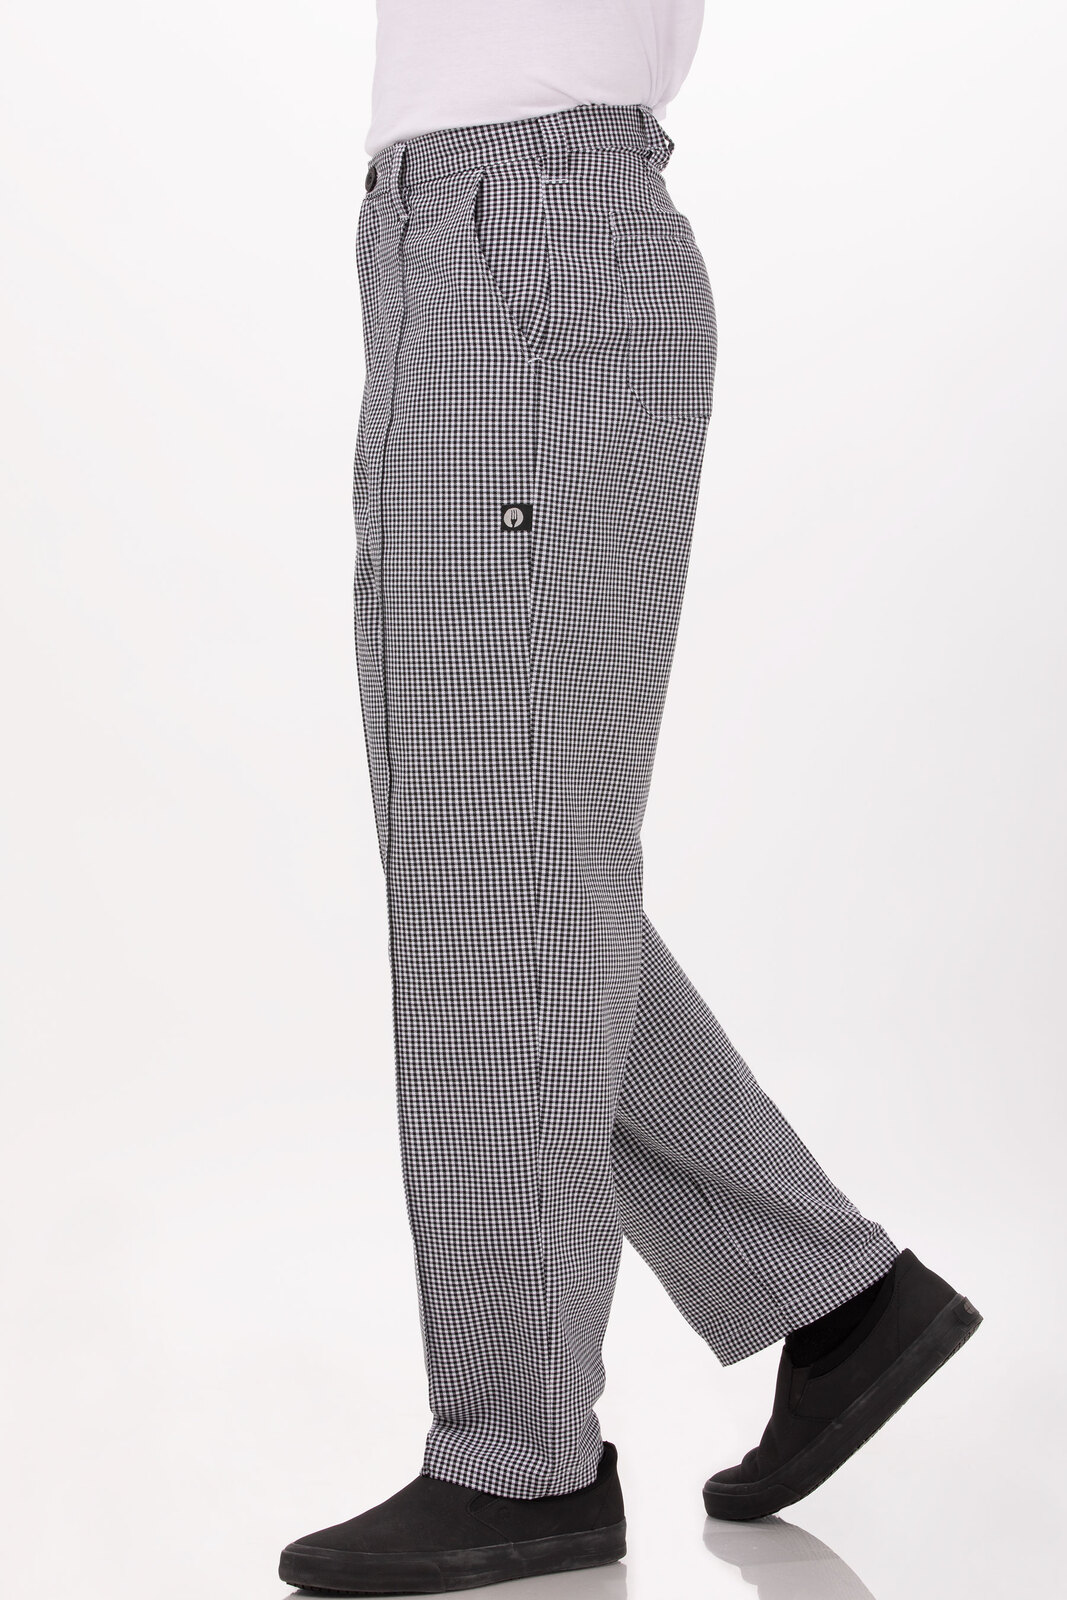 Small Check Fitted Chef Pant | Chef Works Australia